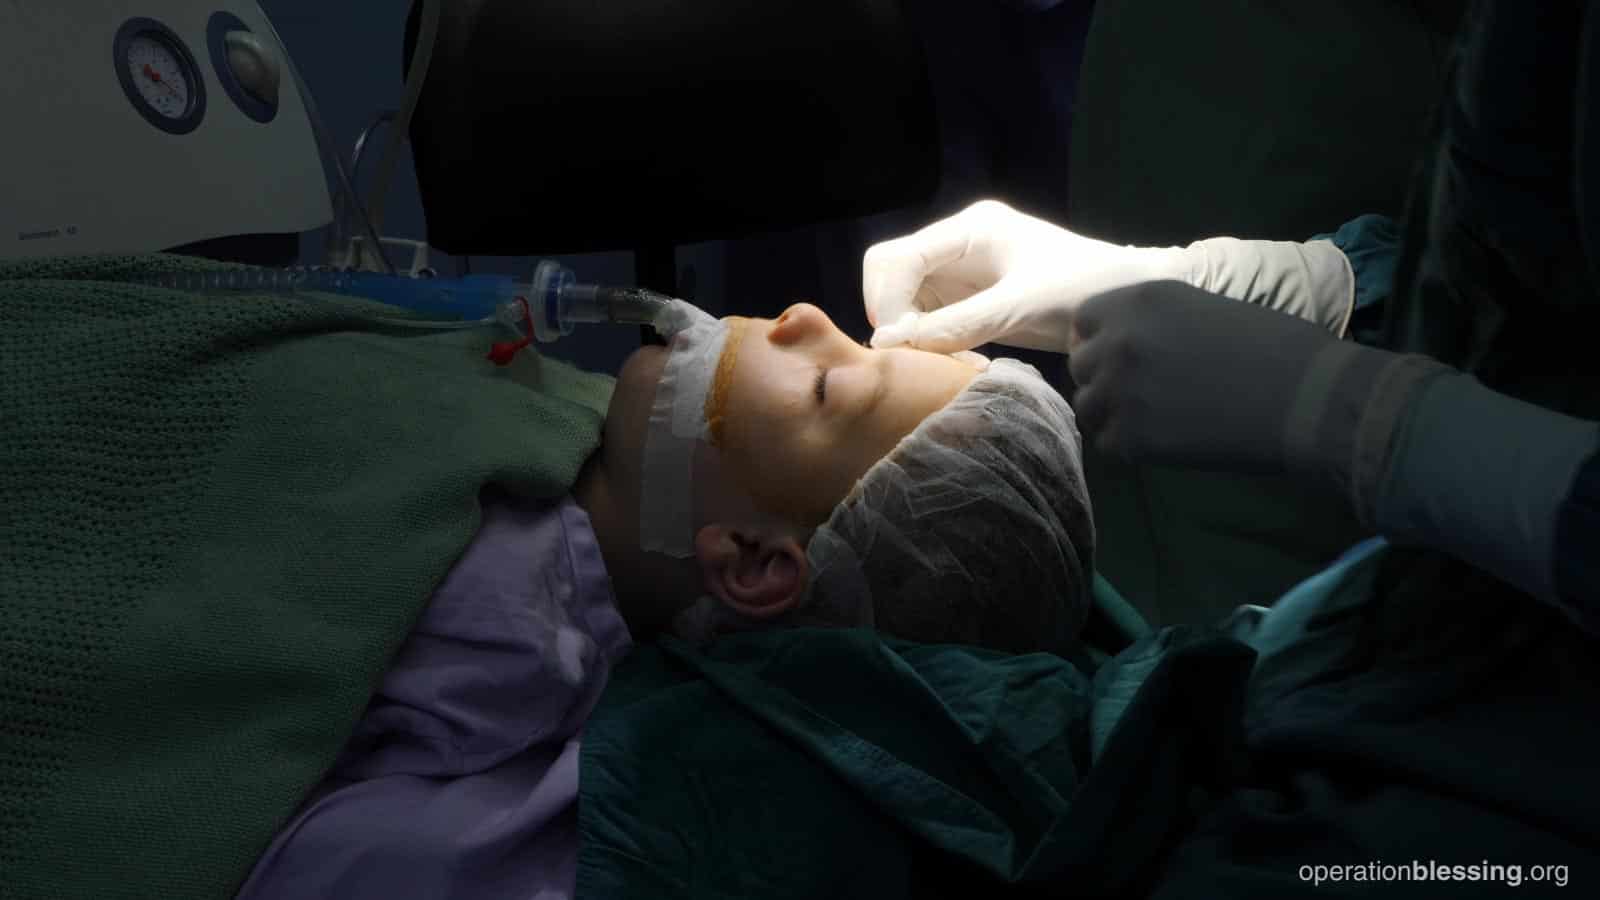 A young boy receives life-changing surgery on his eyes.